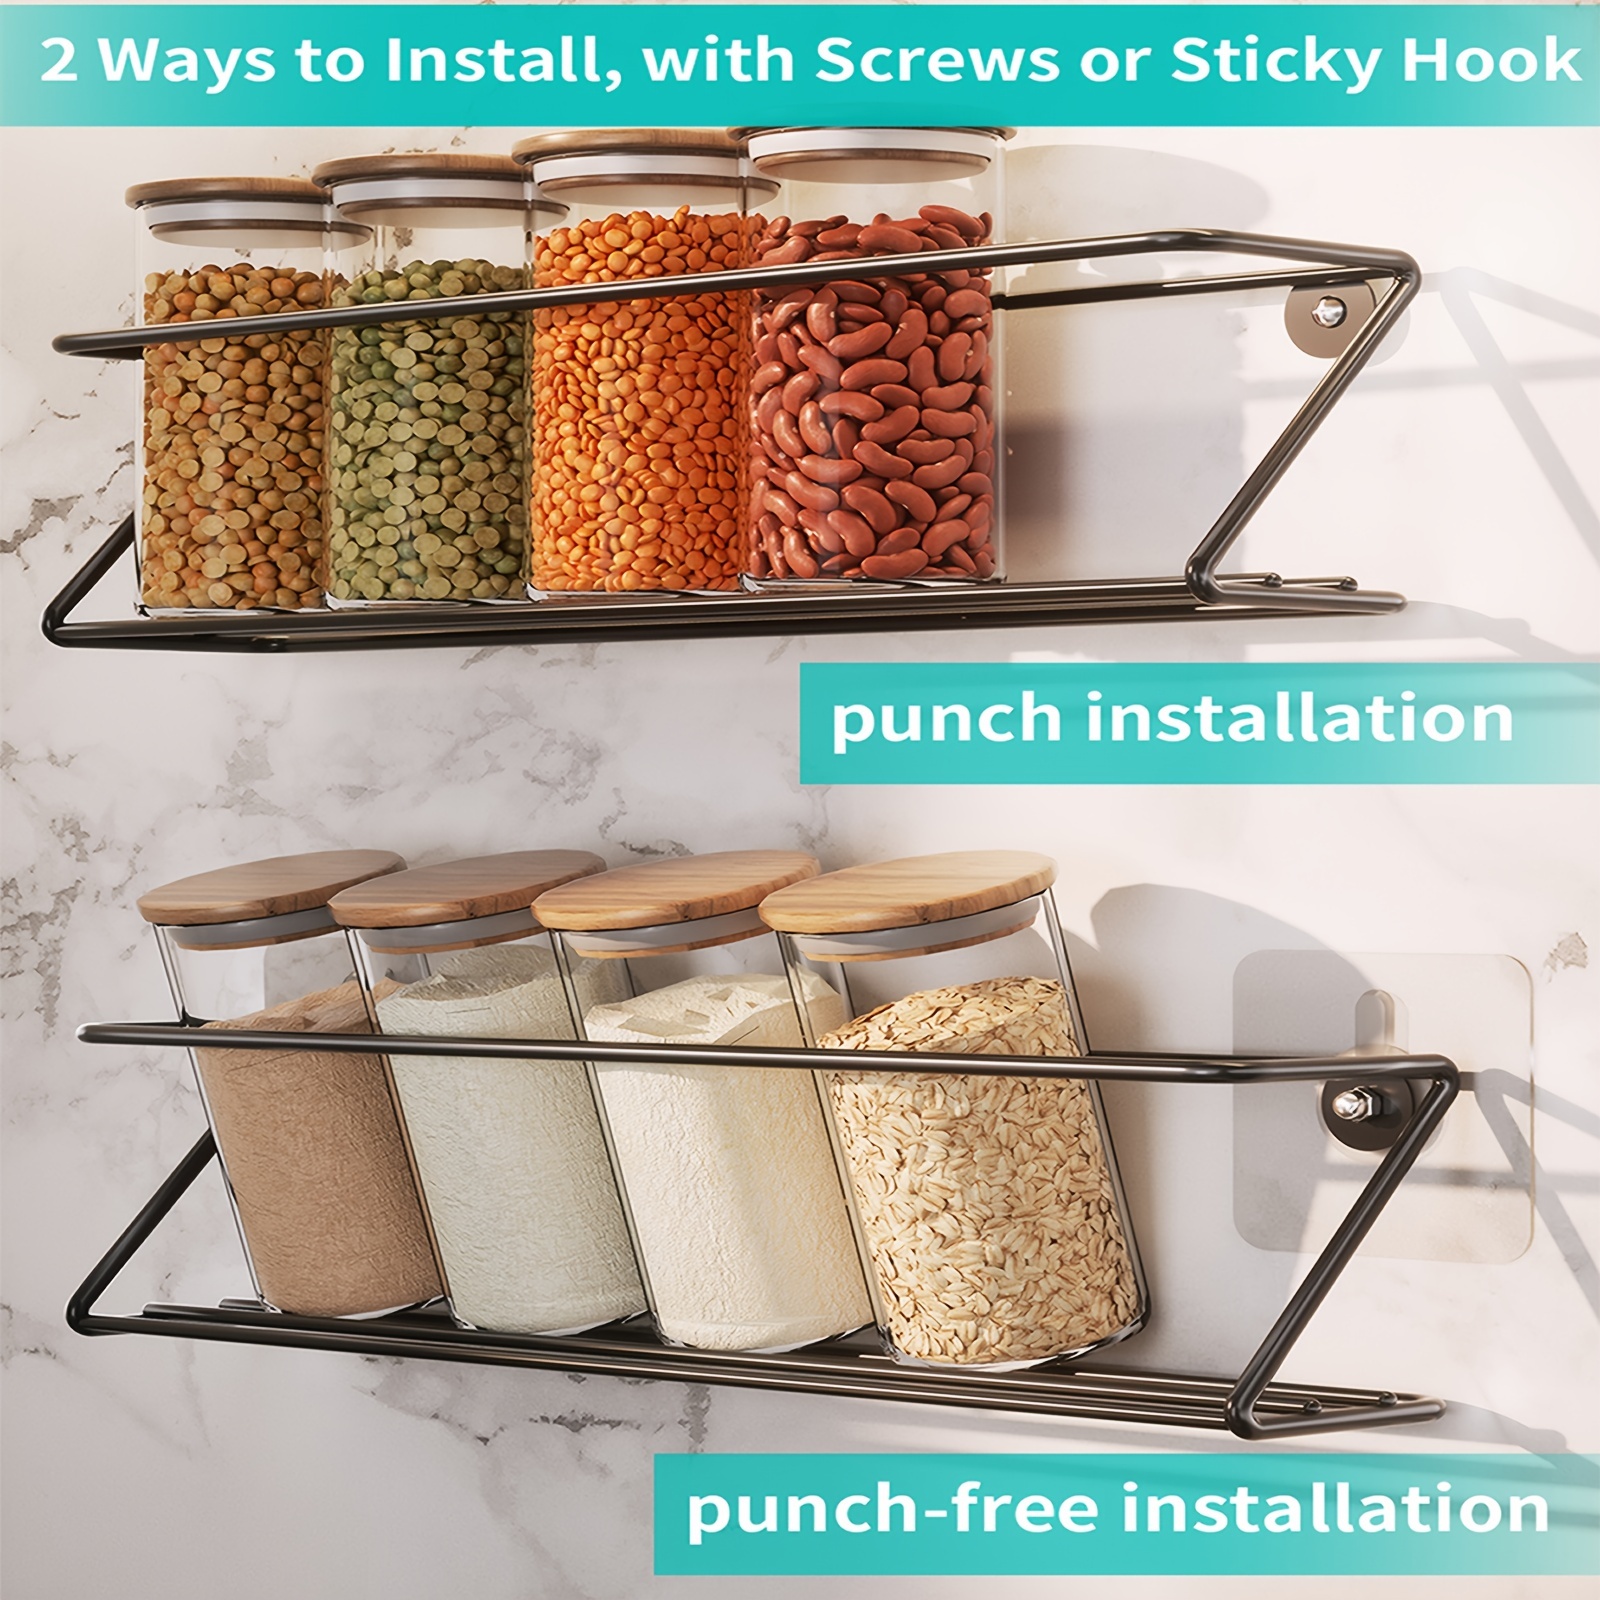 Farmhouse Style Hanging Spice Racks For Wall Mount - Easy To Install Set of  4 Space Saving Racks - The Ideal Seasoning Organizer For Your Kitchen